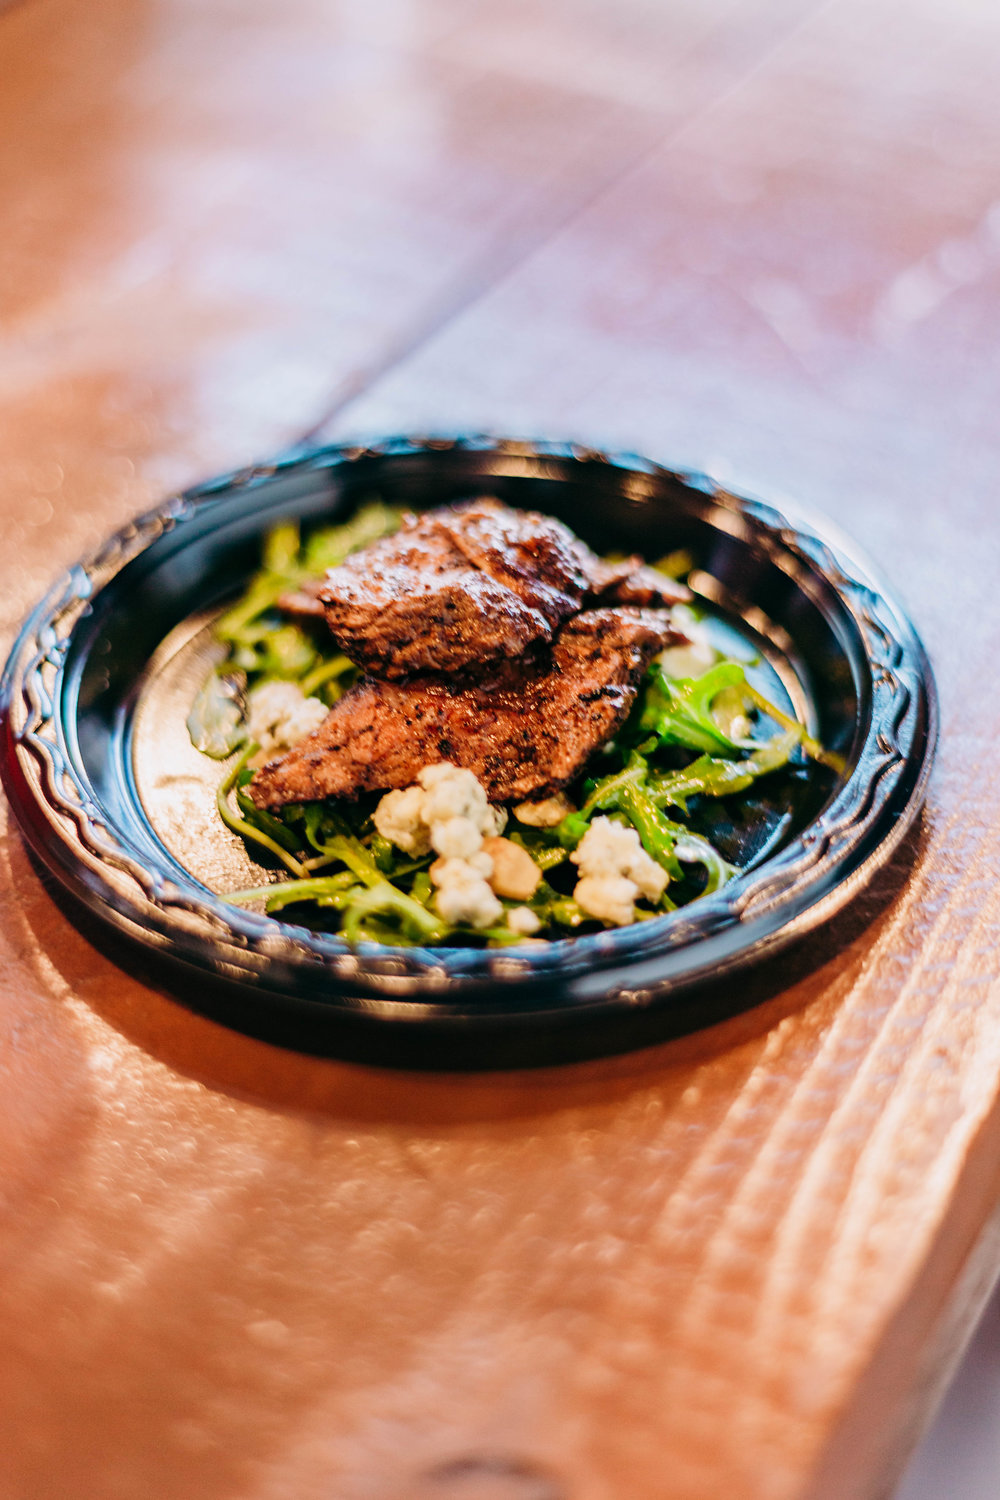  The second course: Steak Salad with Walnuts, Citrus Dressing, and Foir D’Avancio Cheese. Photo by Jennifer Meza. 